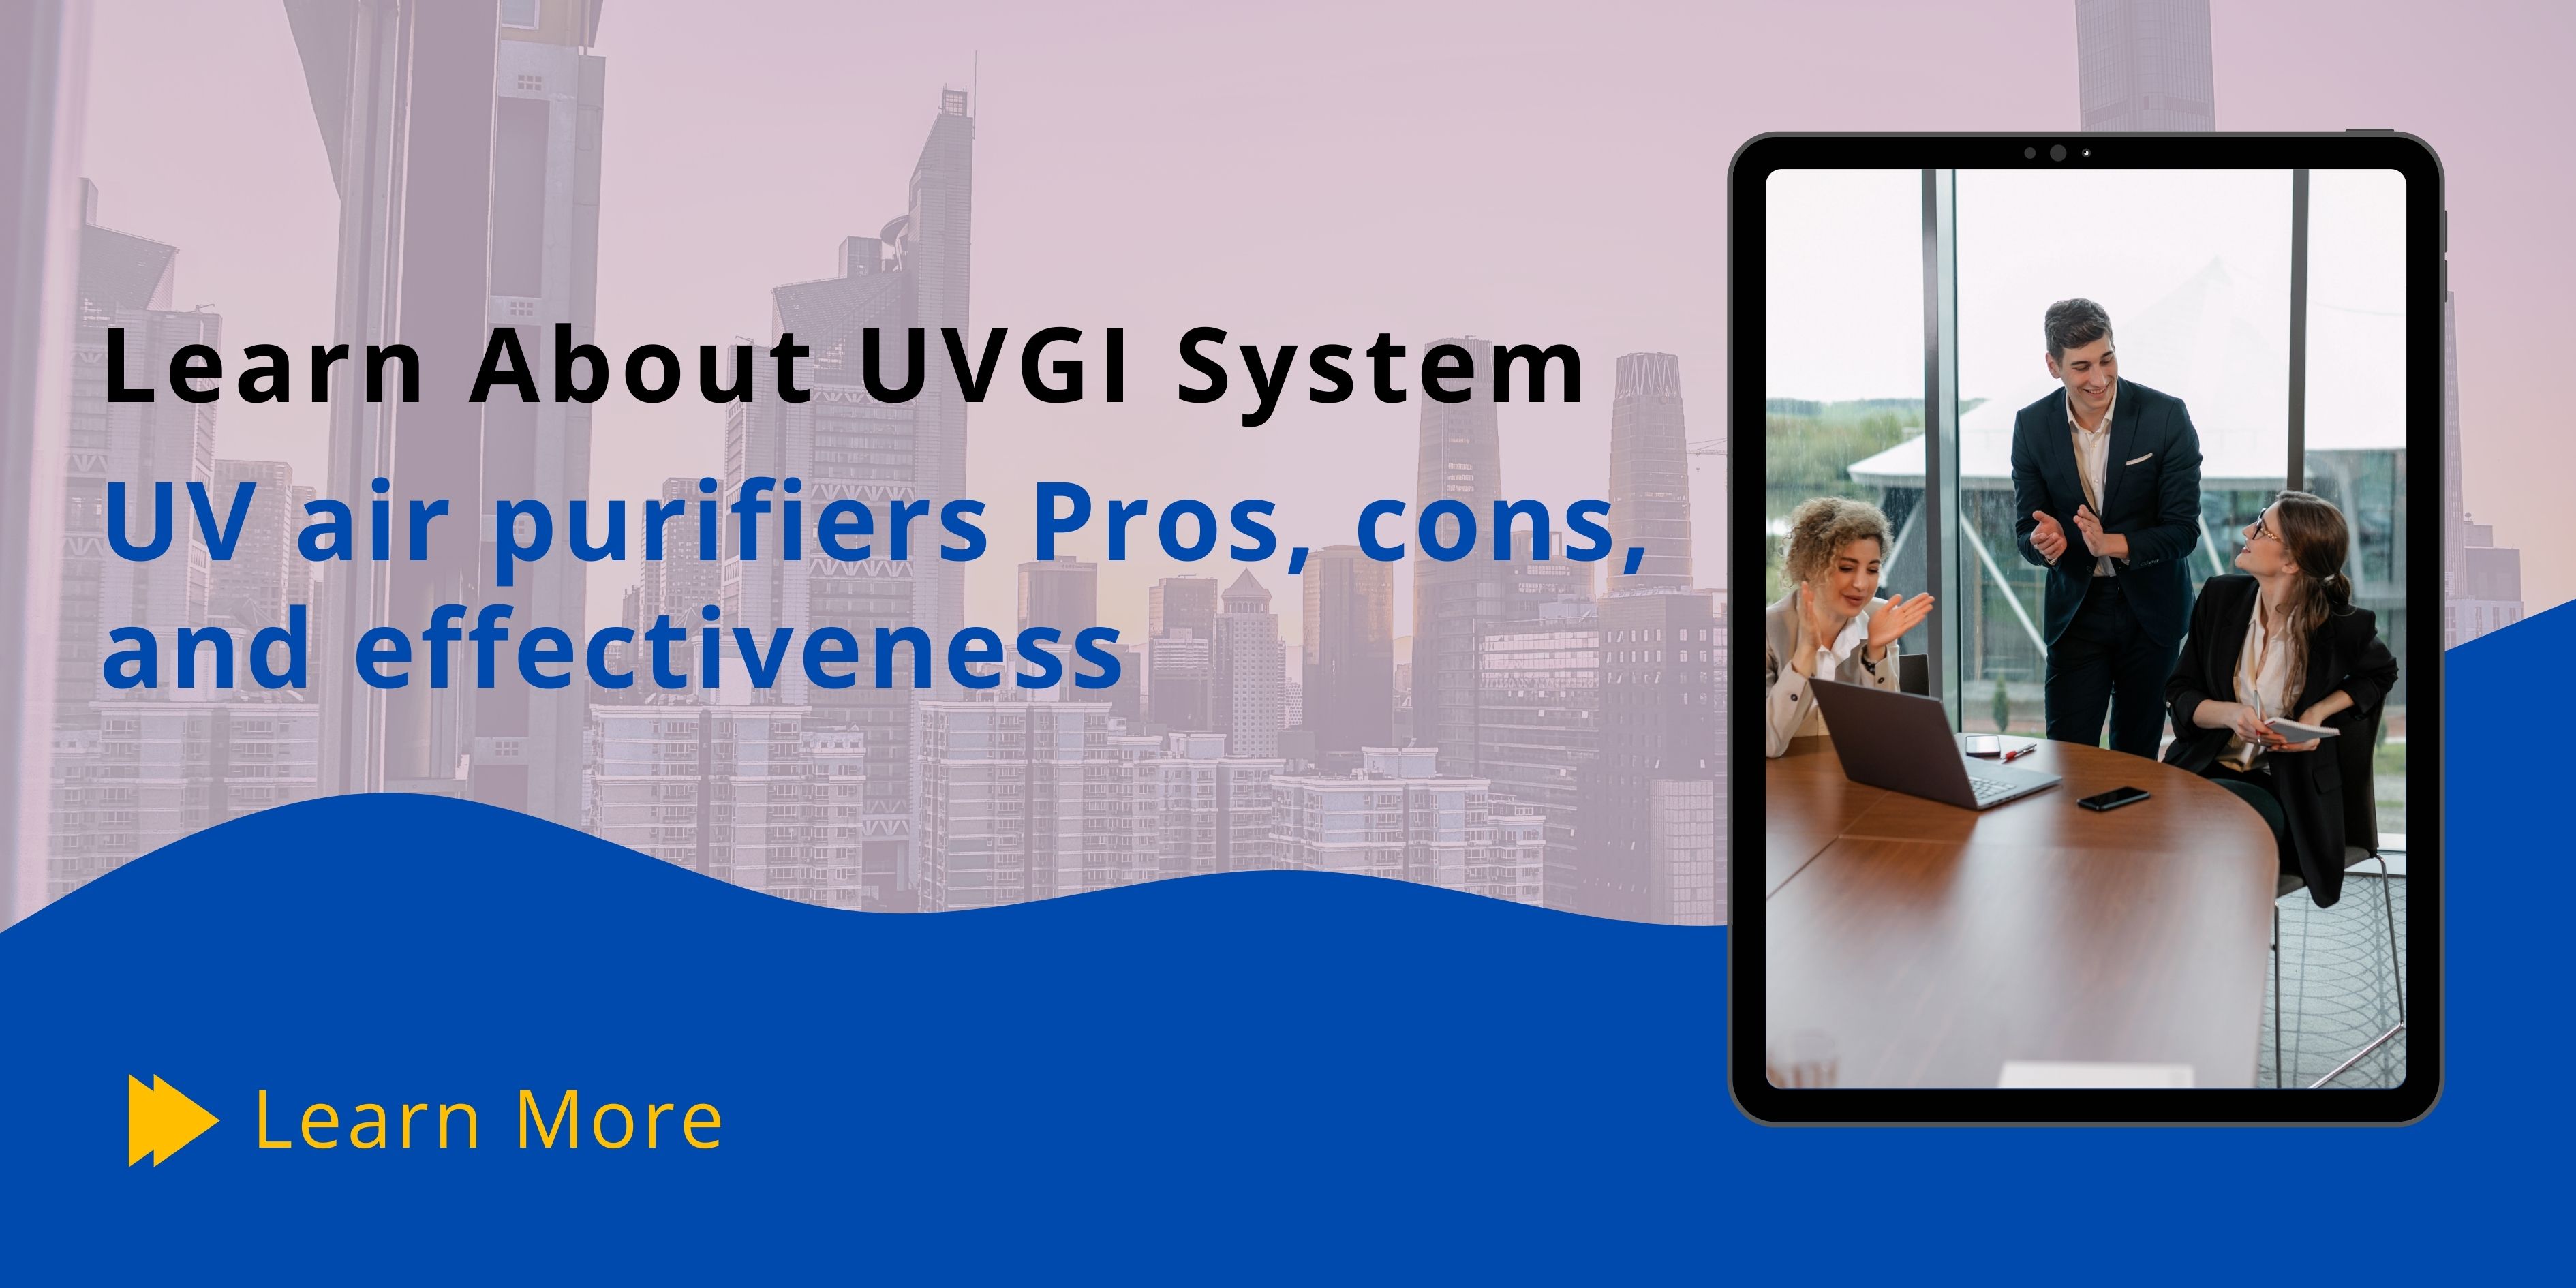 UV Air purifiers Pros, cons, and effectiveness of UVGI System UV air purifiers Pros, cons, and effectiveness | UVGI System Benefits